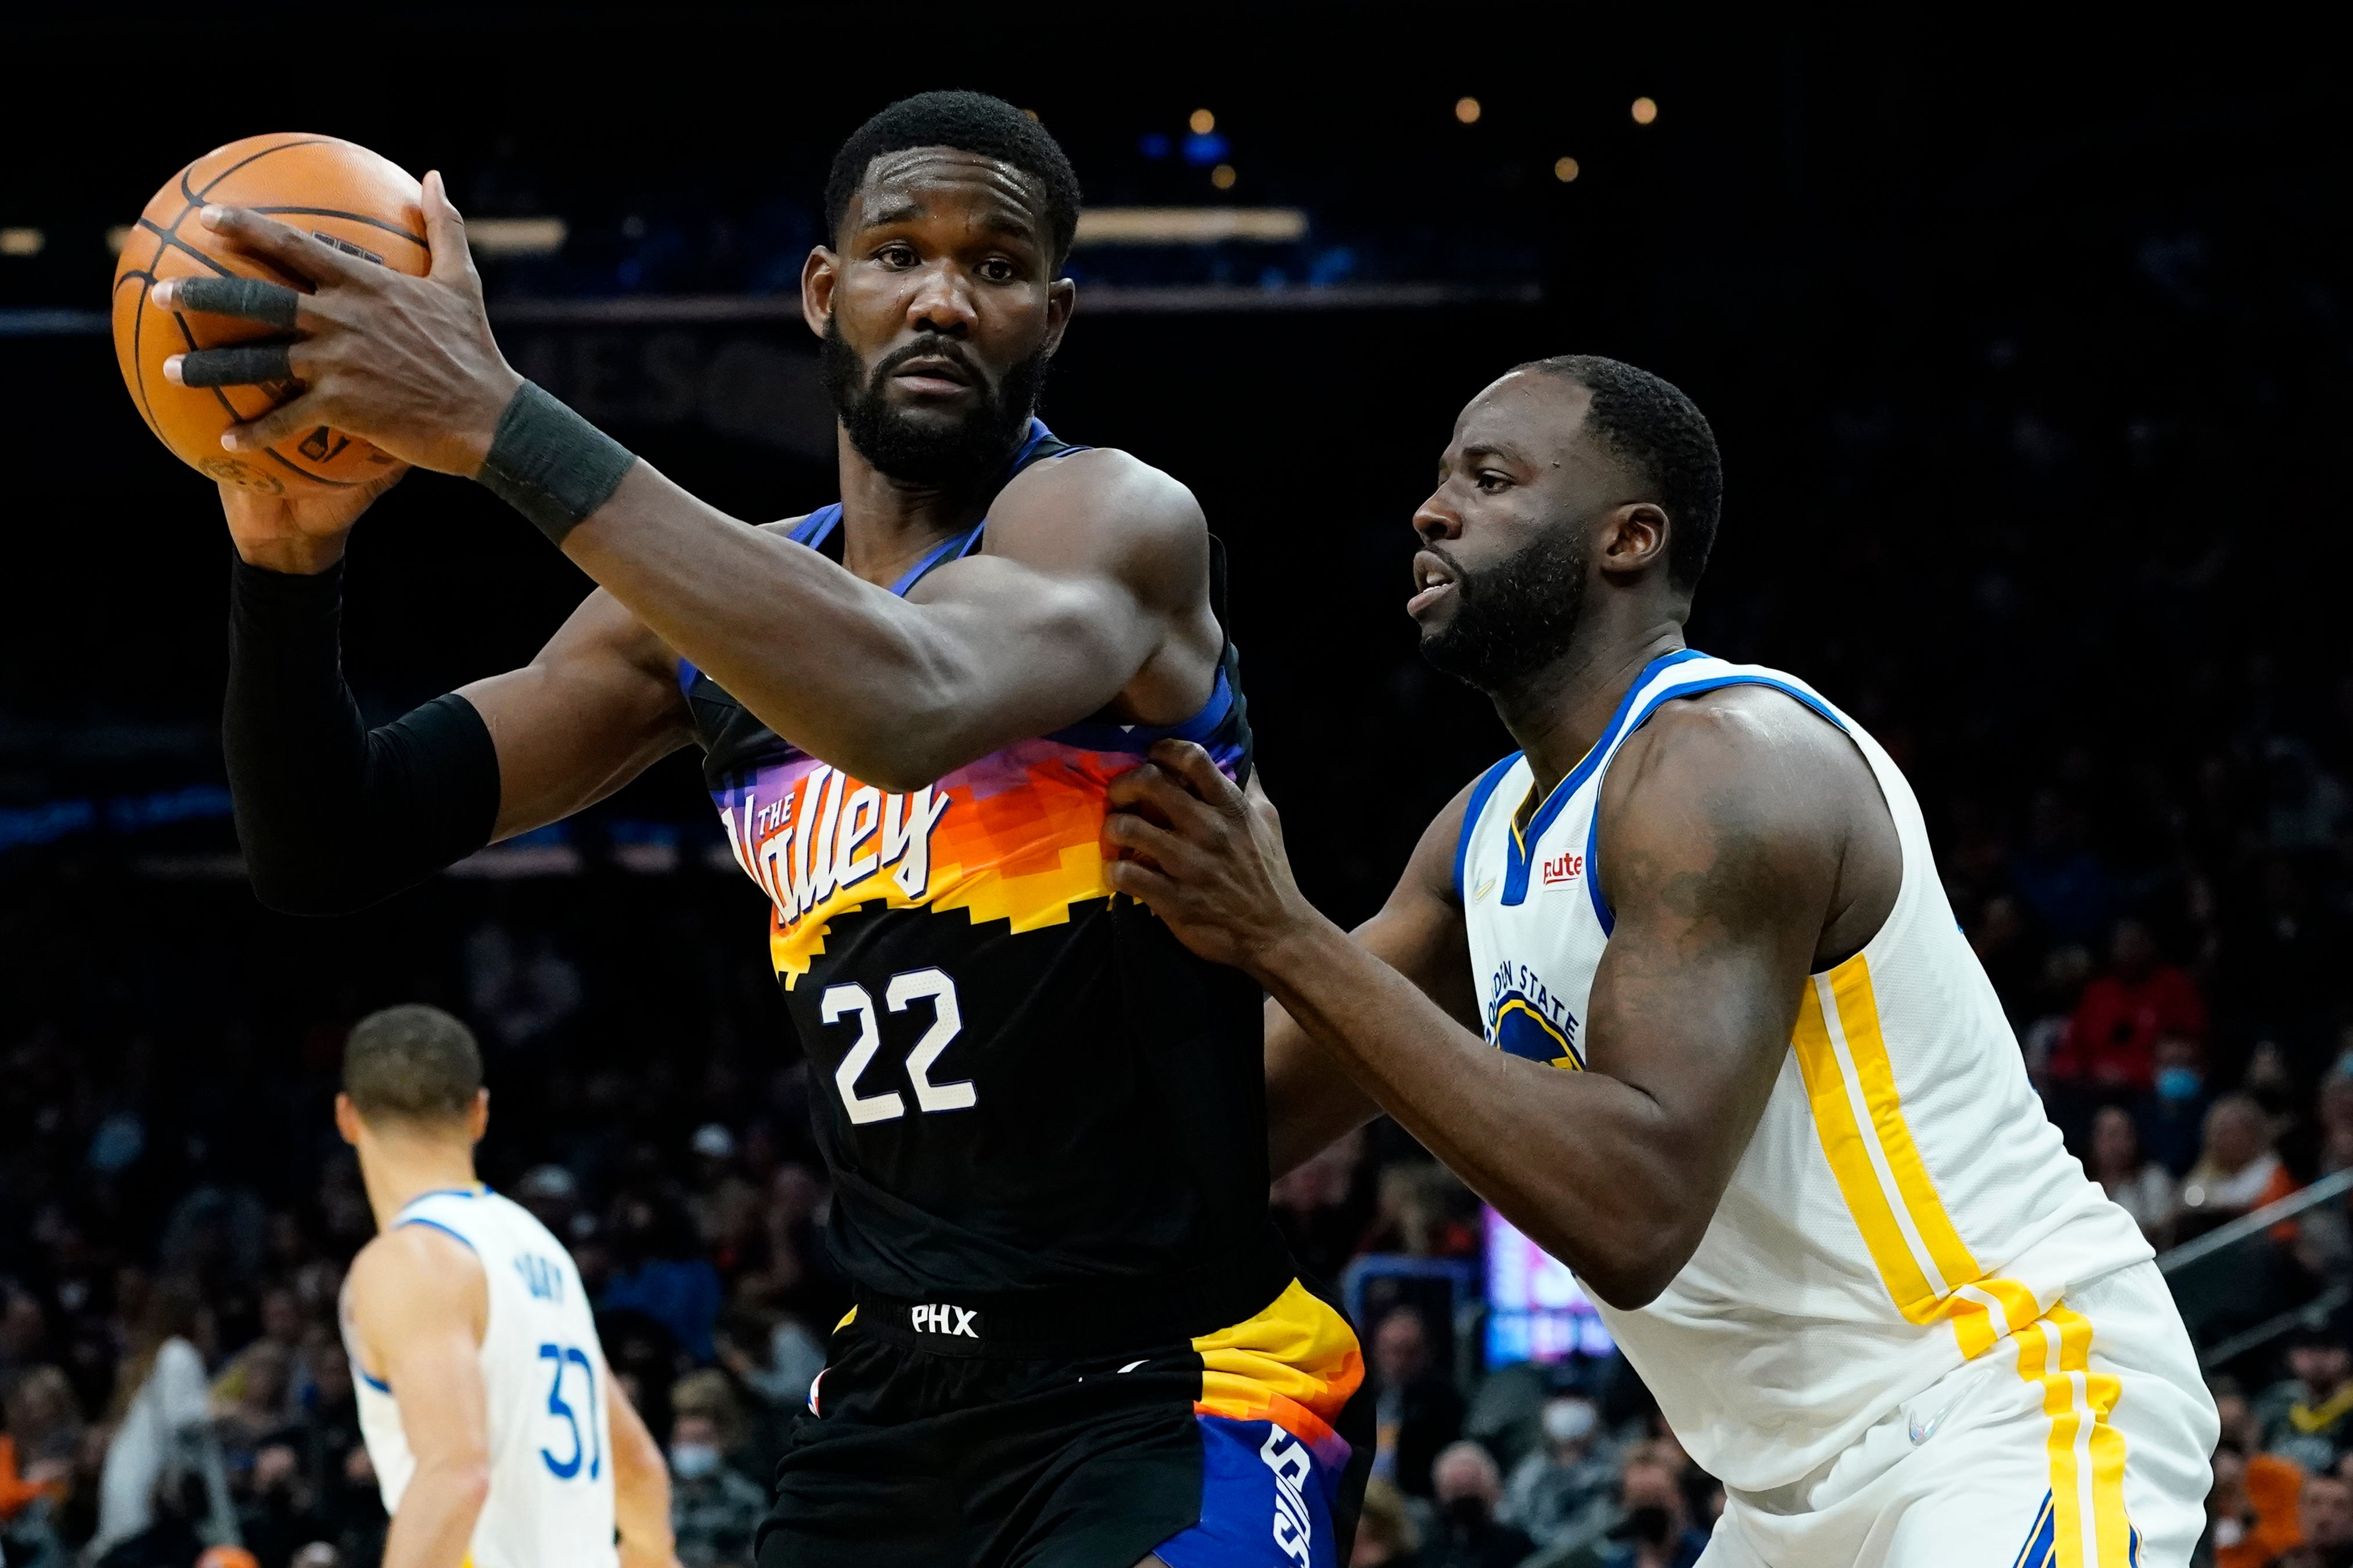 Golden State Warriors: The beauty of Draymond remains on full display